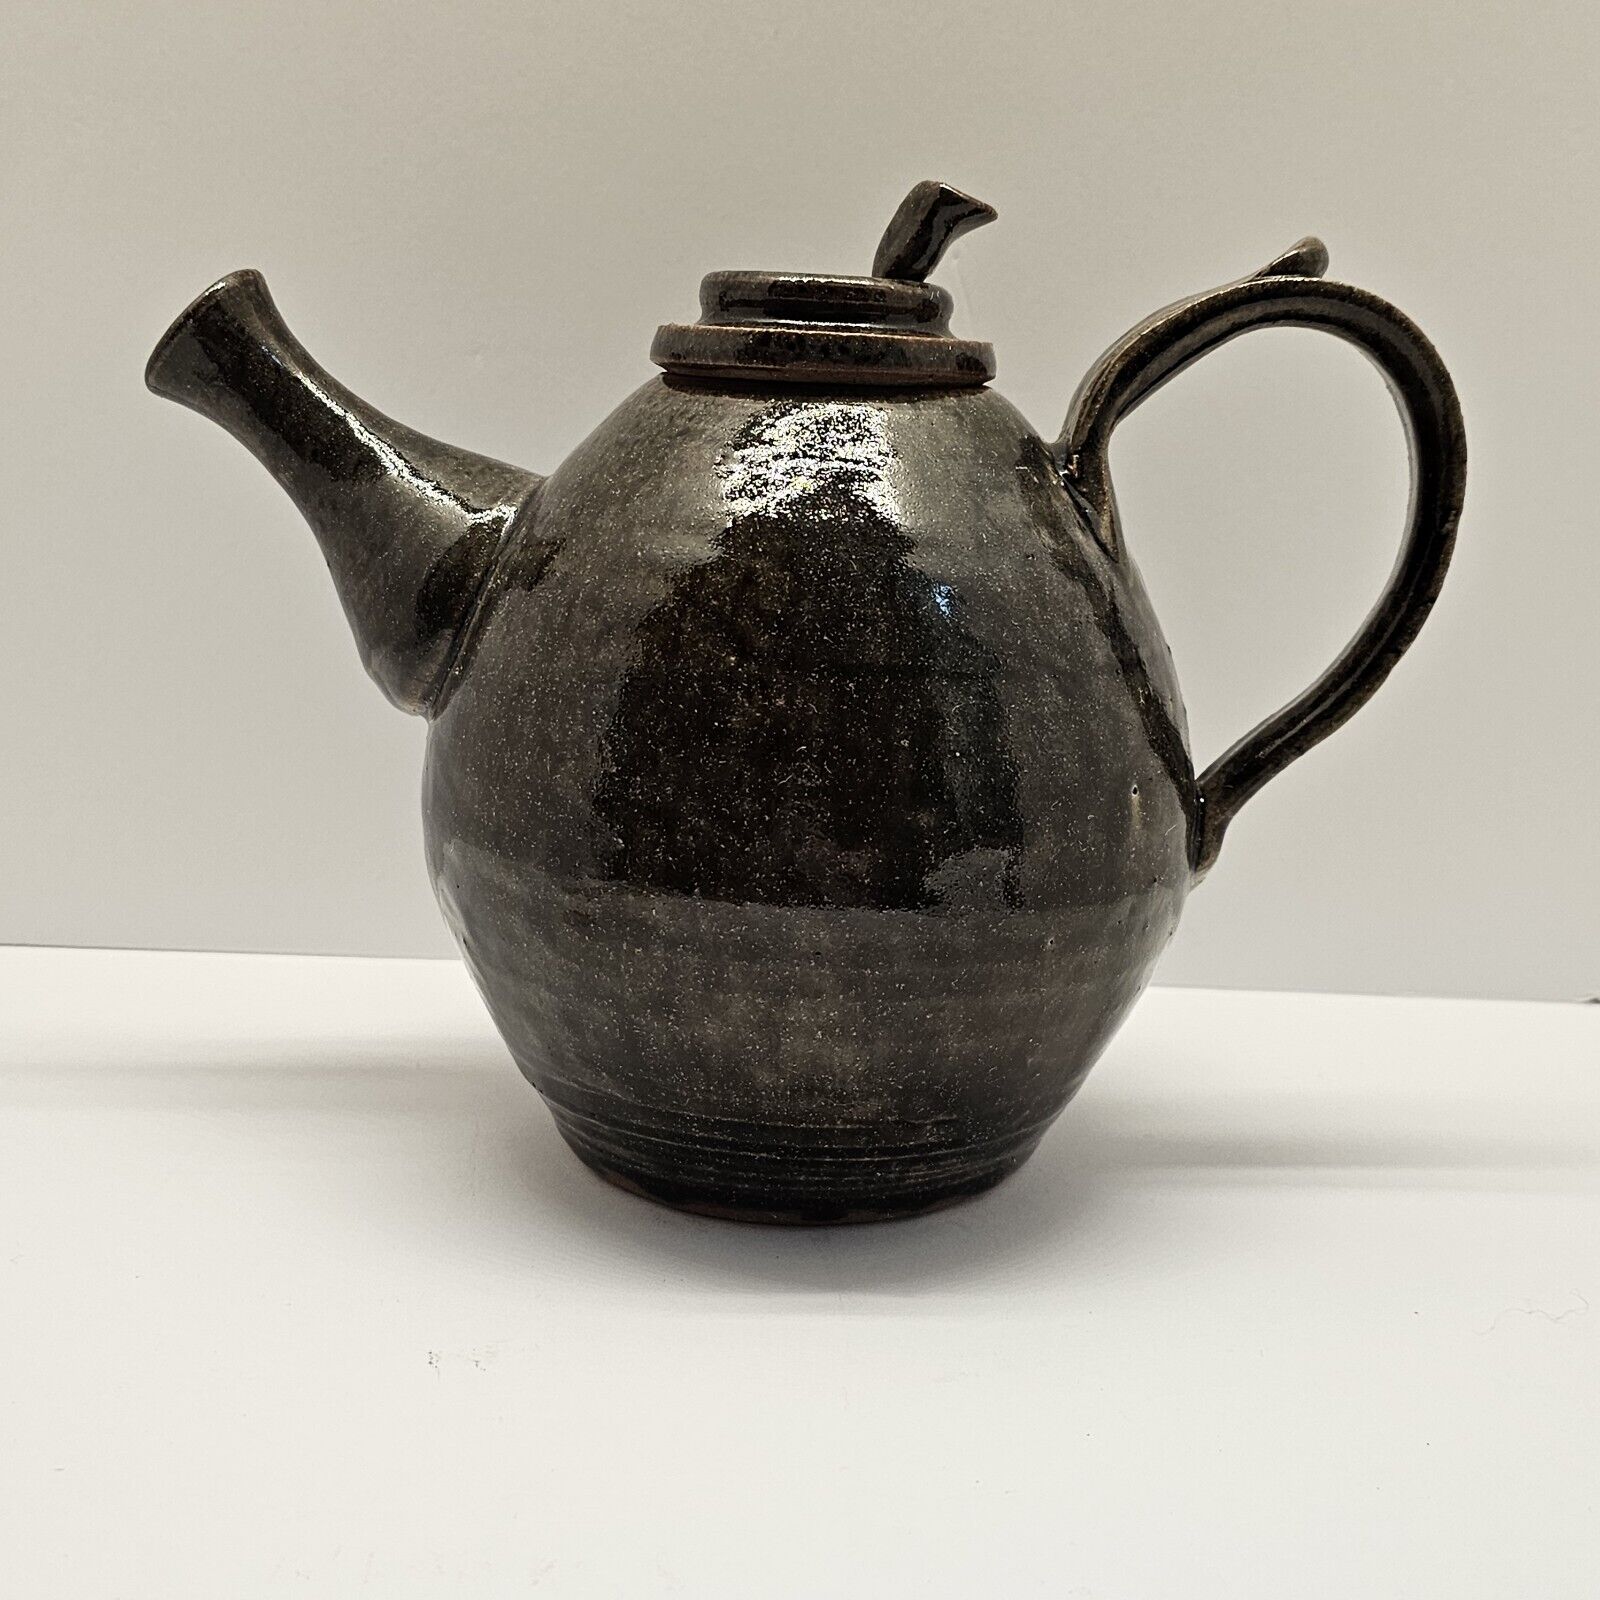 Vintage Clay Teapot with Lid Handmade Primative Style Green/Brown Molted Glaze